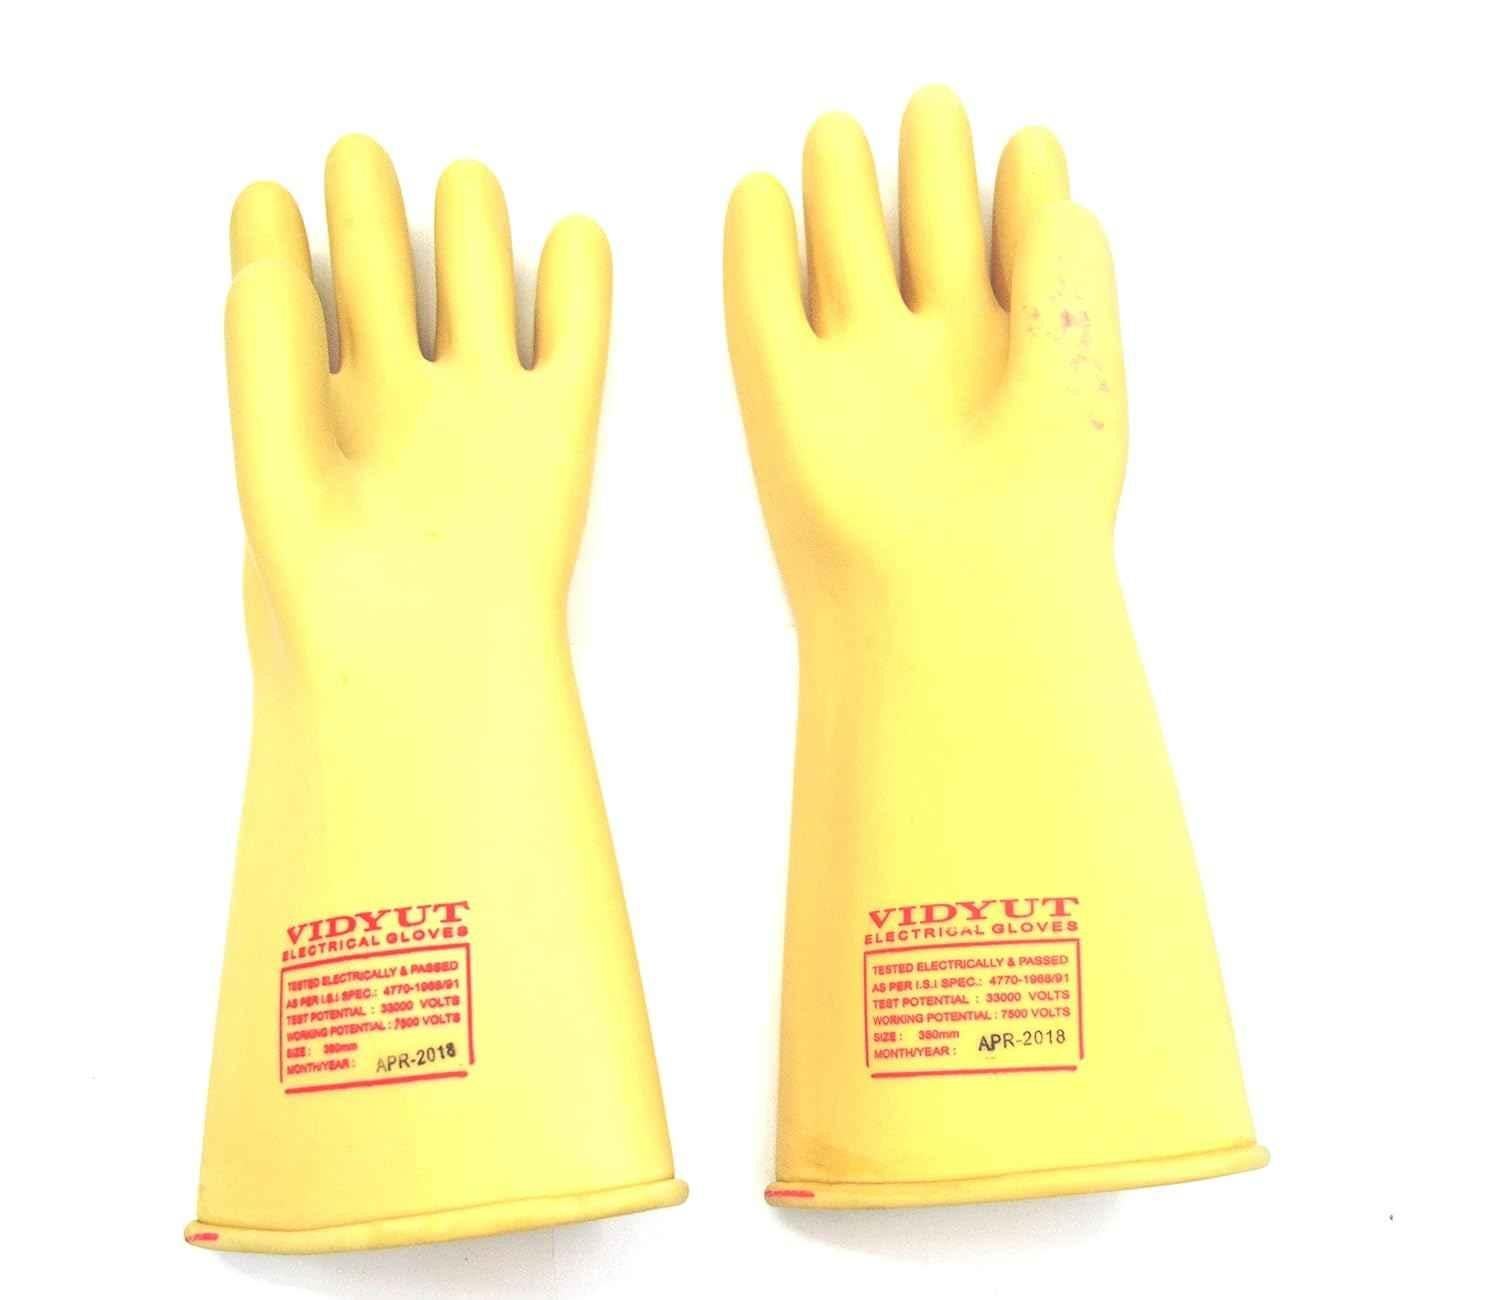 Electric Shock Proof Rubber Hand Gloves of Test Volts 33000